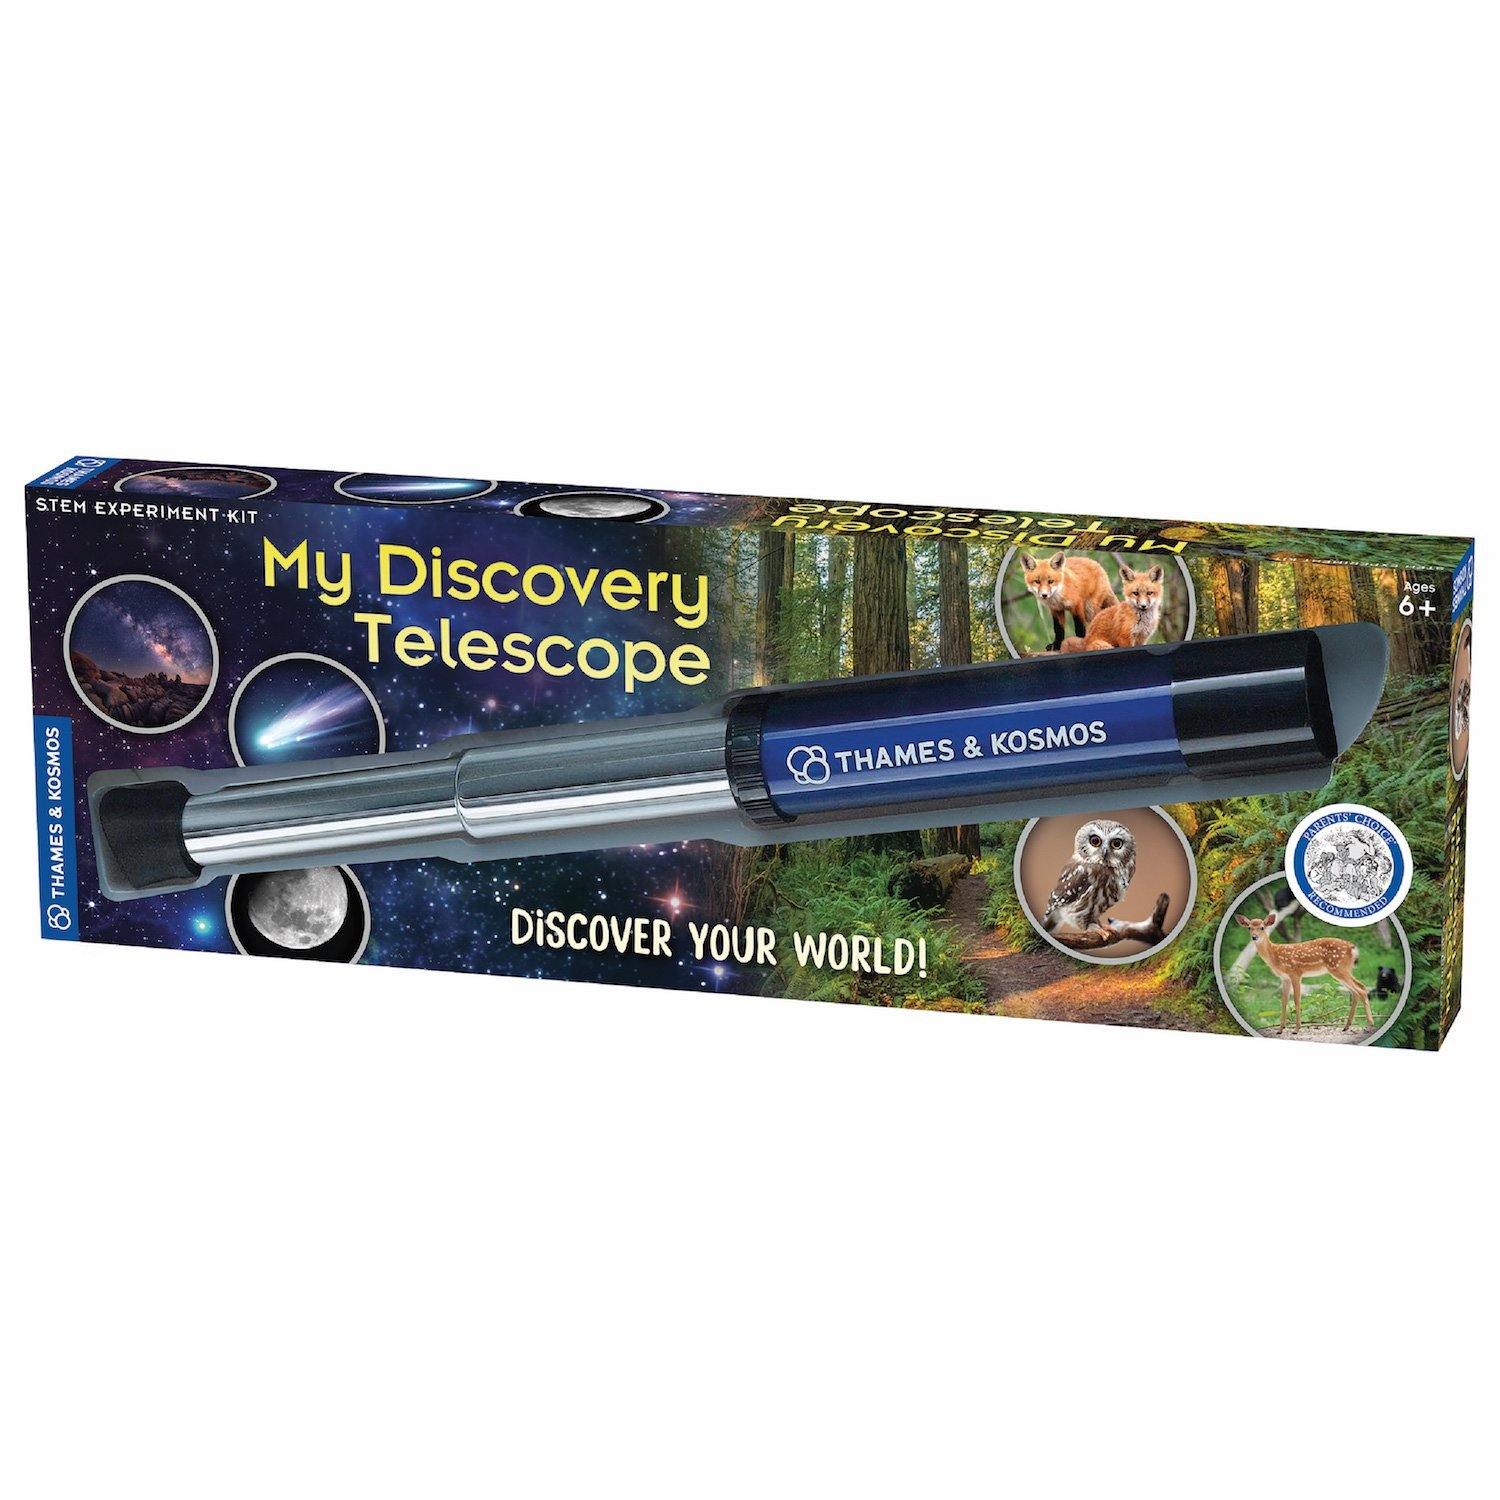 My Discovery Telescope - Scientific Instruments - Science Museum Shop